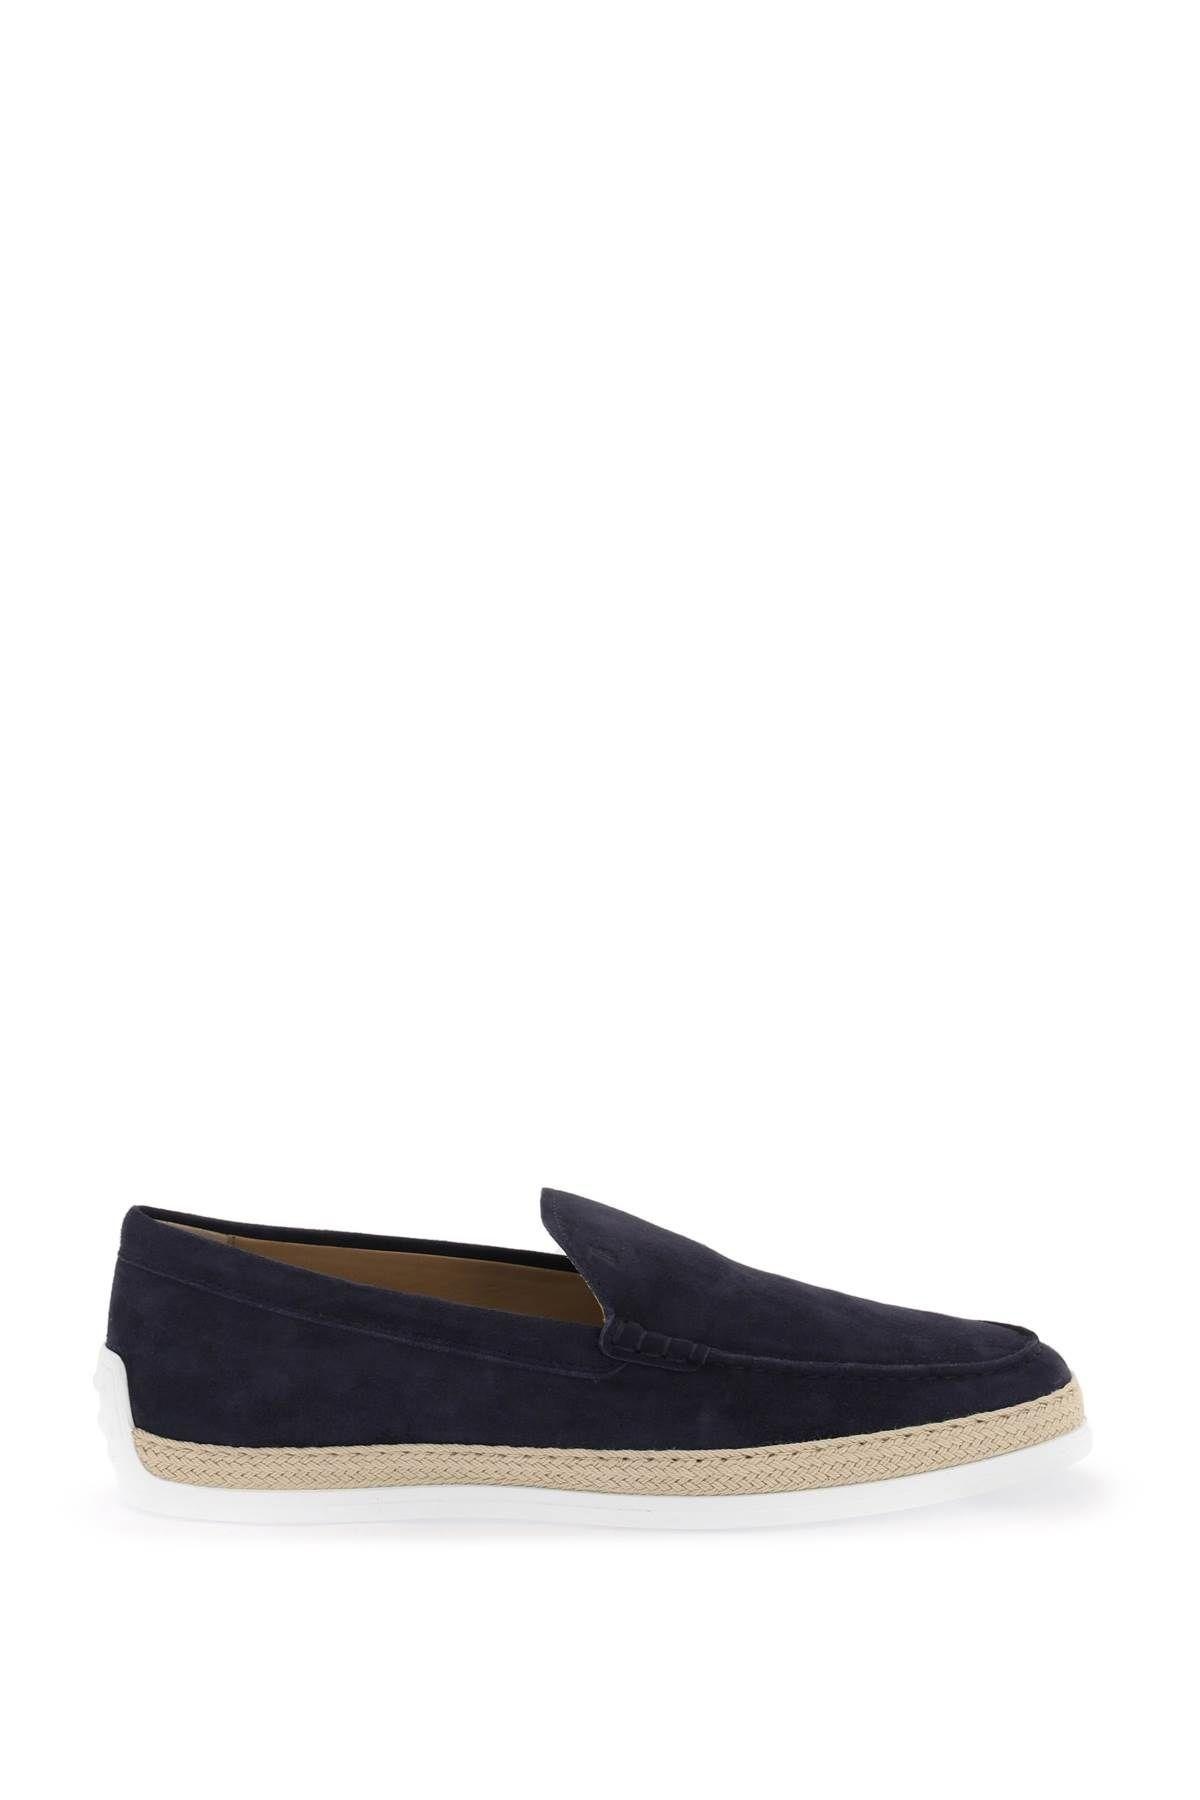 Suede slip-on with rafia insert Tod's - 1